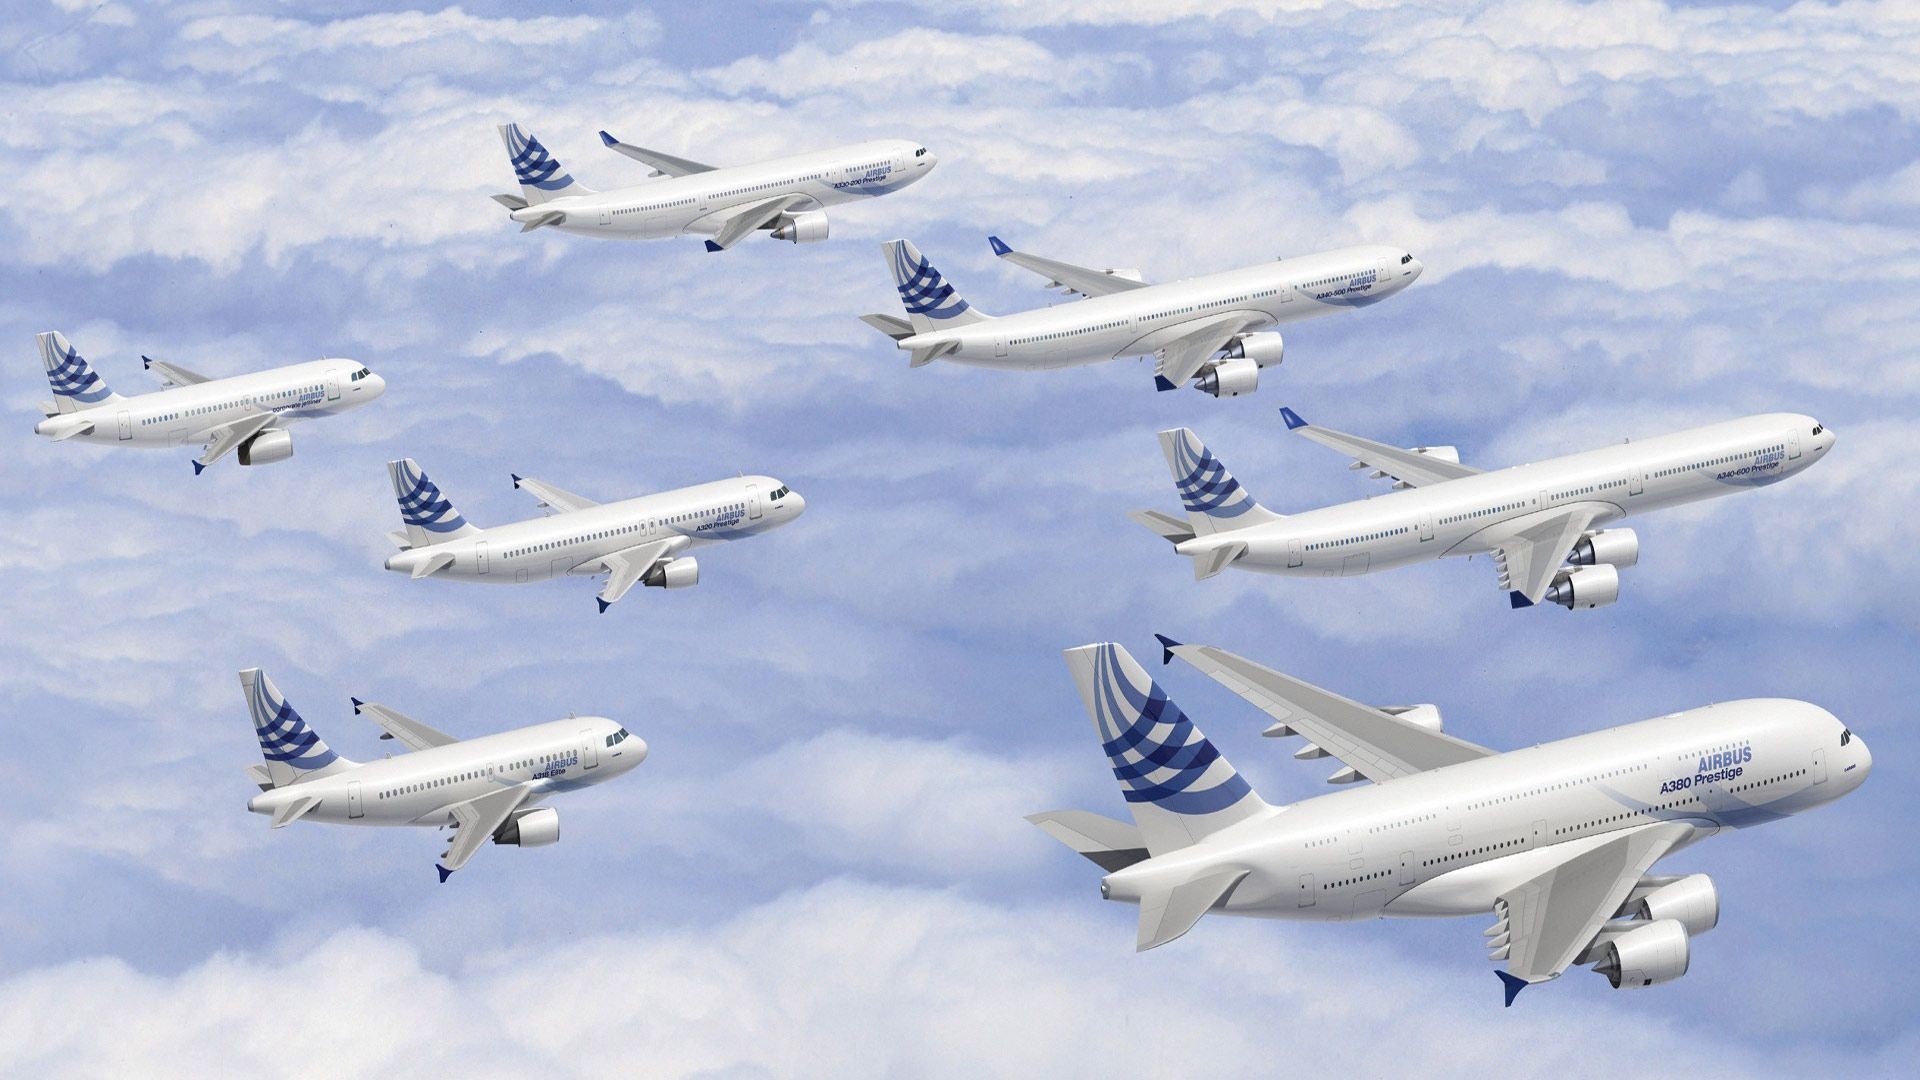 Airbus Wallpapers - Top Free Airbus Backgrounds 1920x1080